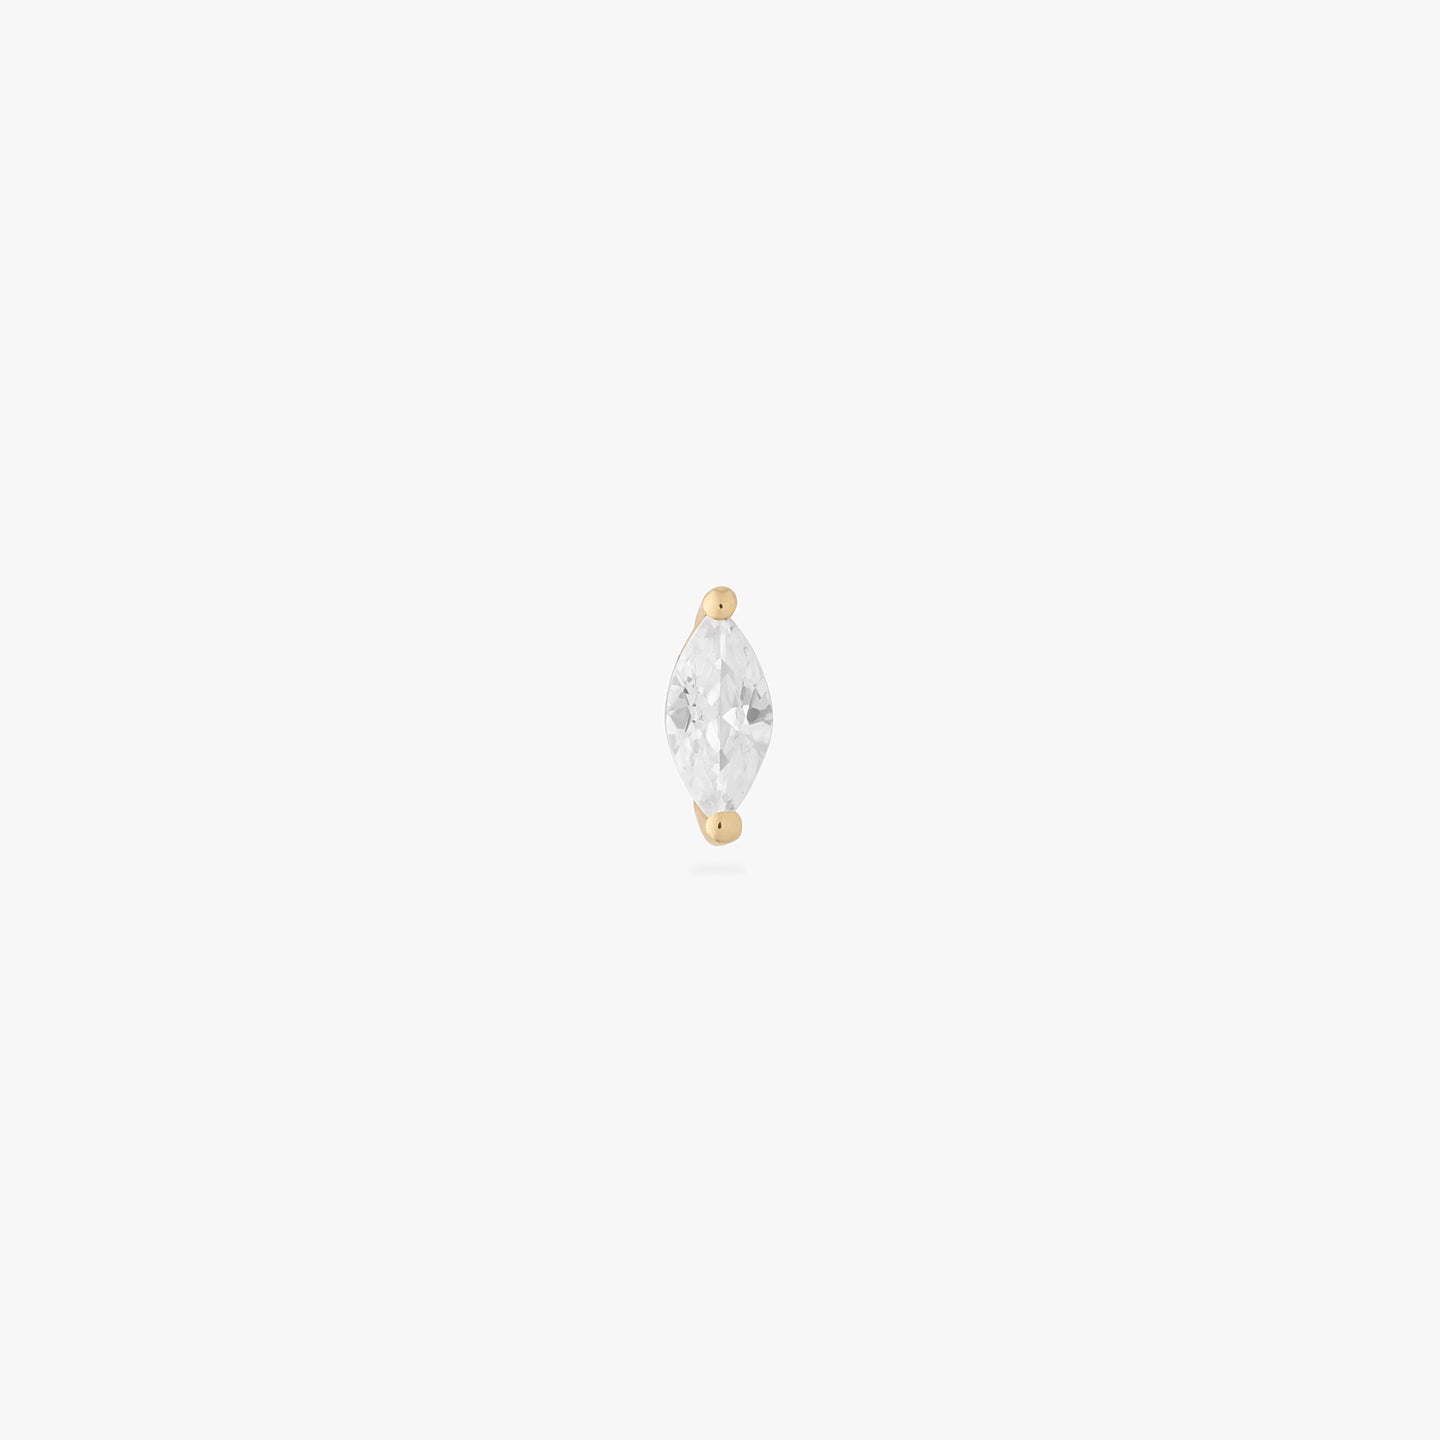 An image of a gold/clear marquise CZ stone shaped flatback post that is 8mm in length color:null|8mm length